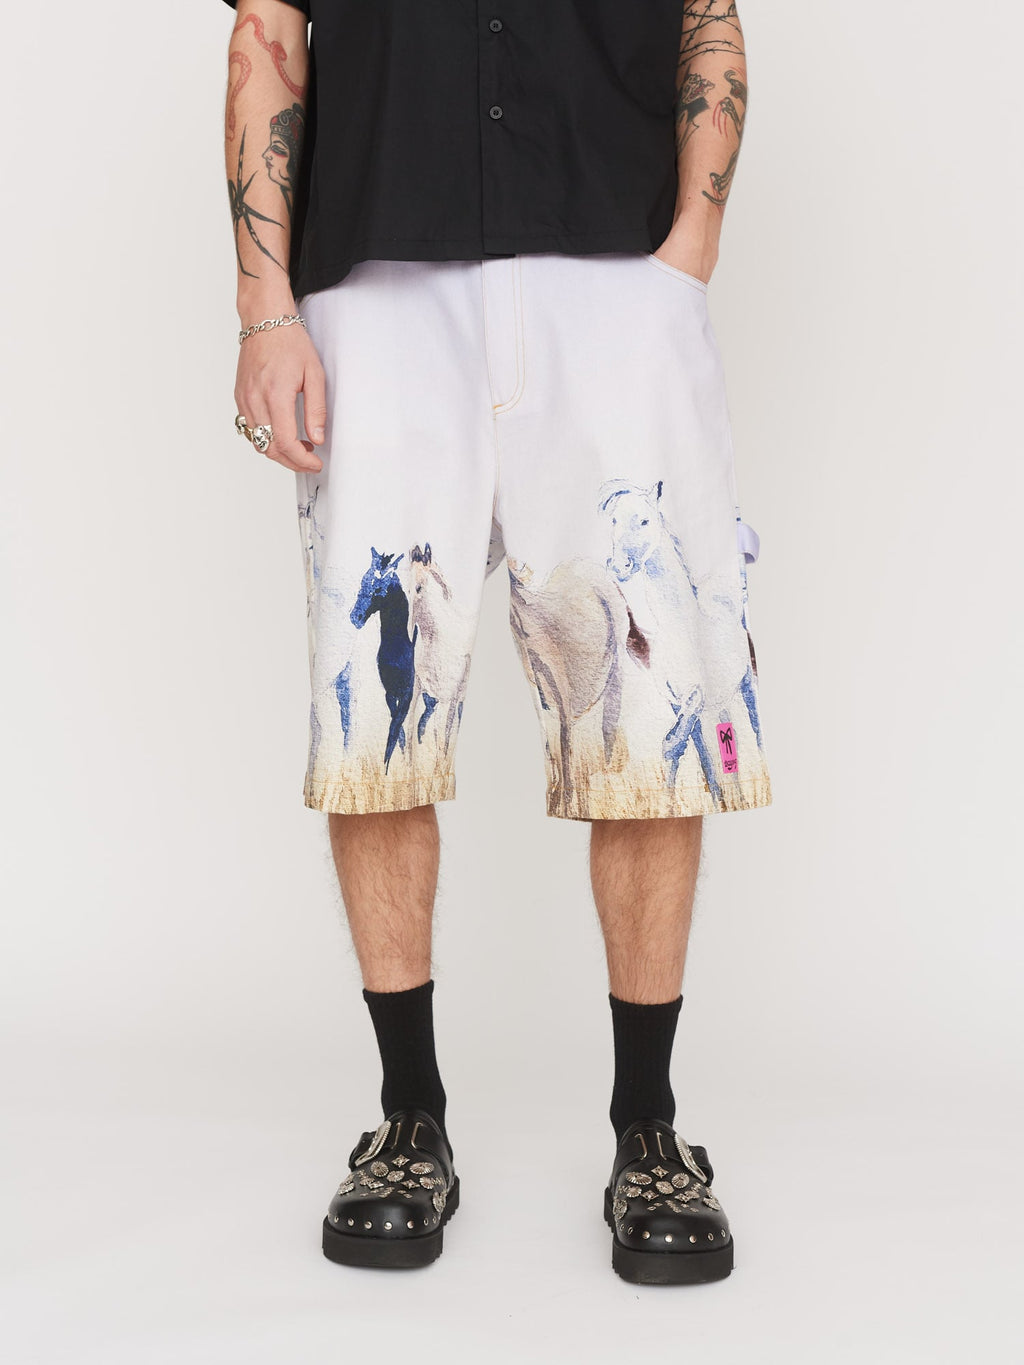 collection-men-landing, collection-men-new-in-1, collection-mens-trousers, collection-men-festival